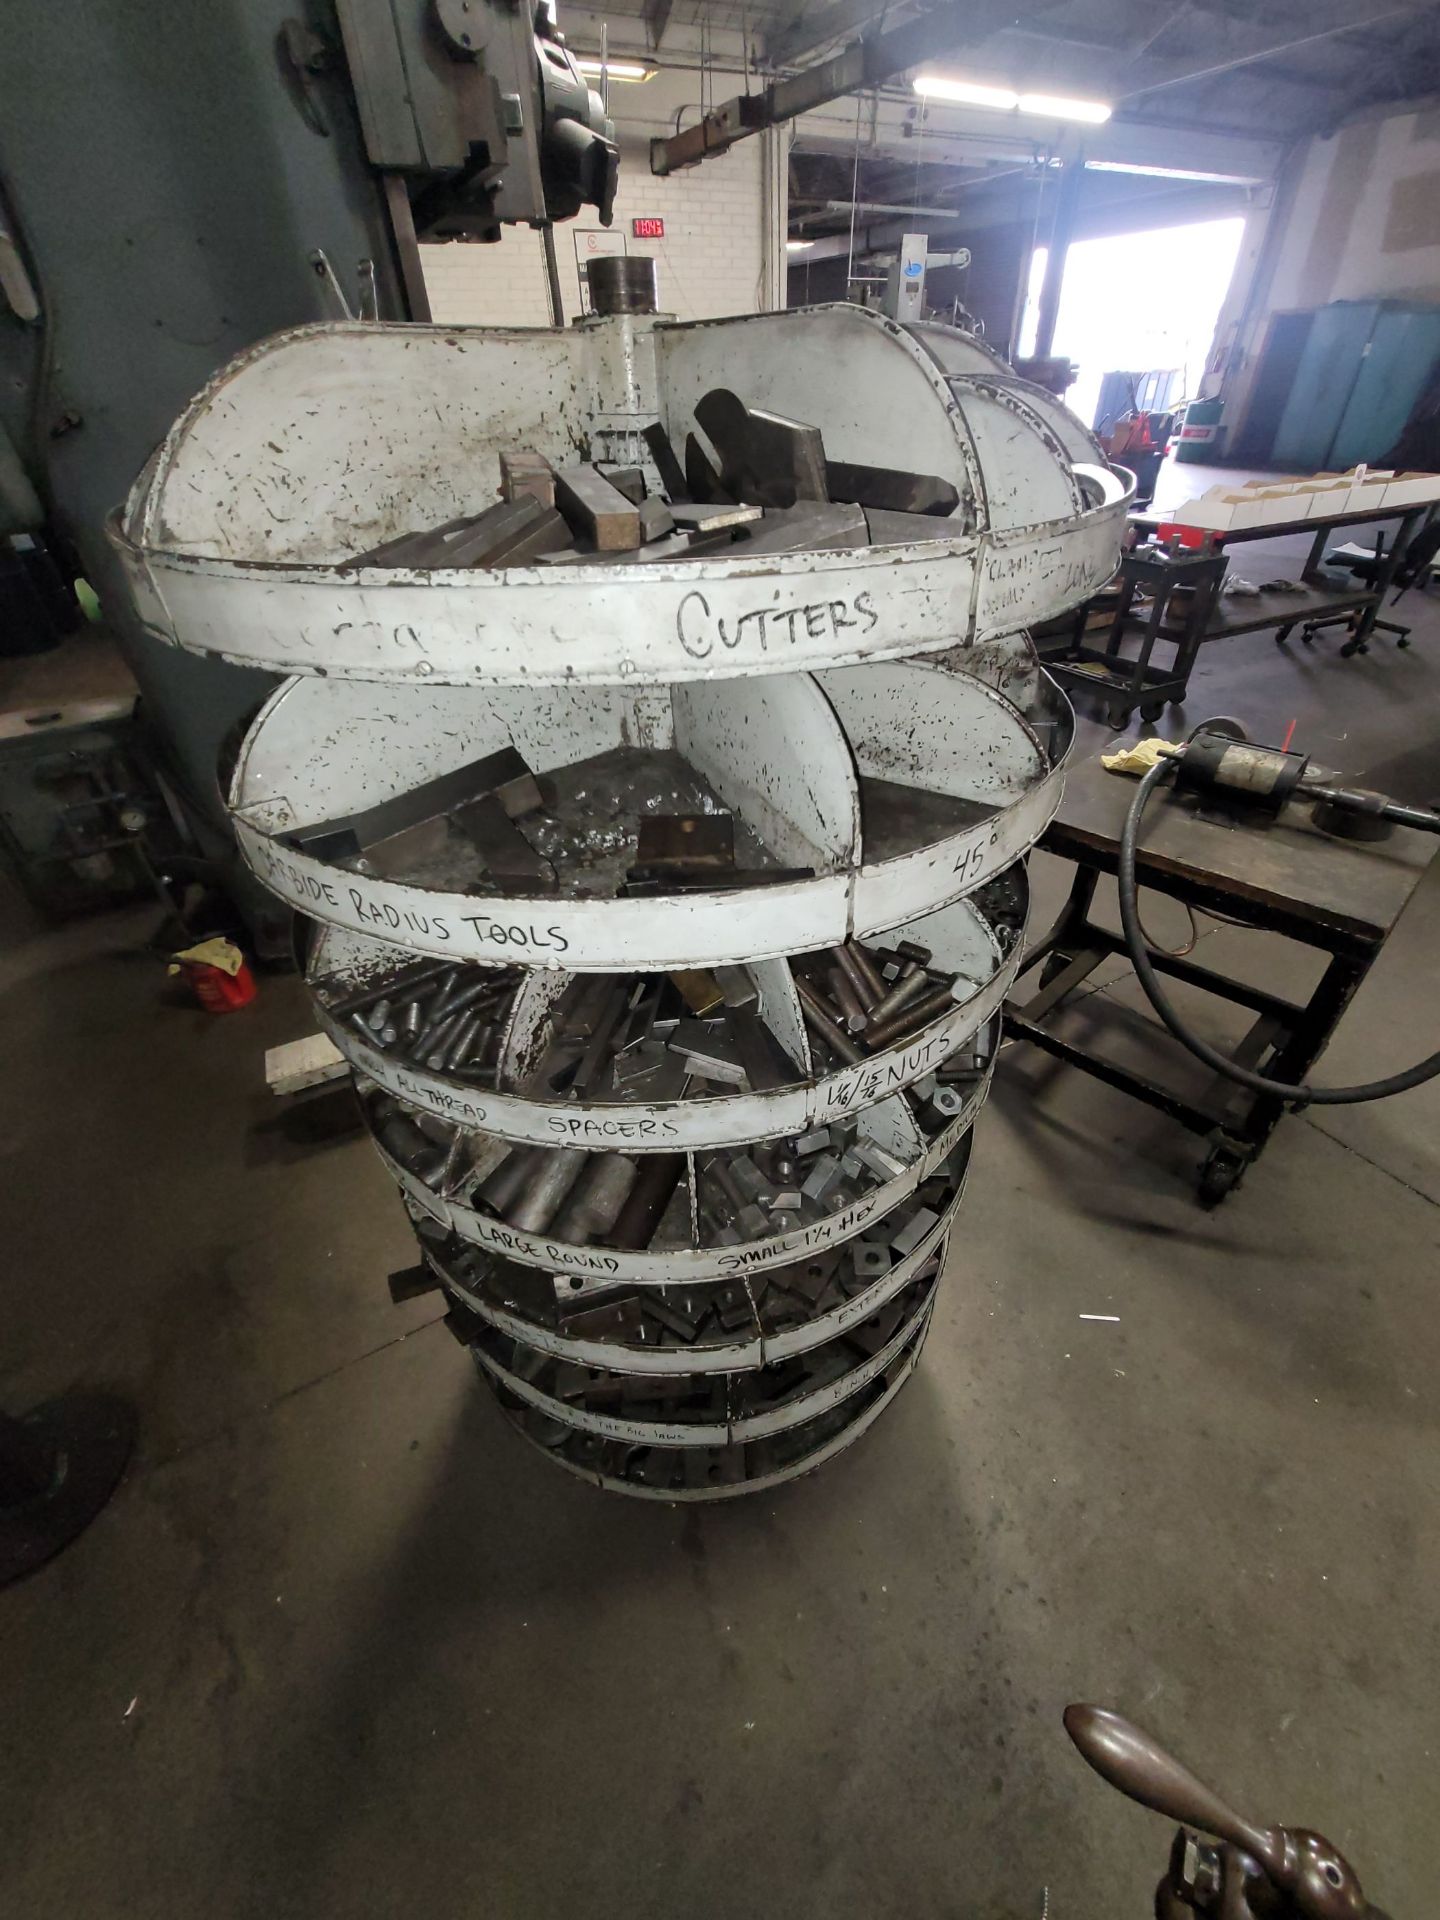 LOT - CAROUSEL PARTS BIN, W/ CONTENTS: HOLD-DOWNS AND TOOLING, AS PICTURED - Image 6 of 6